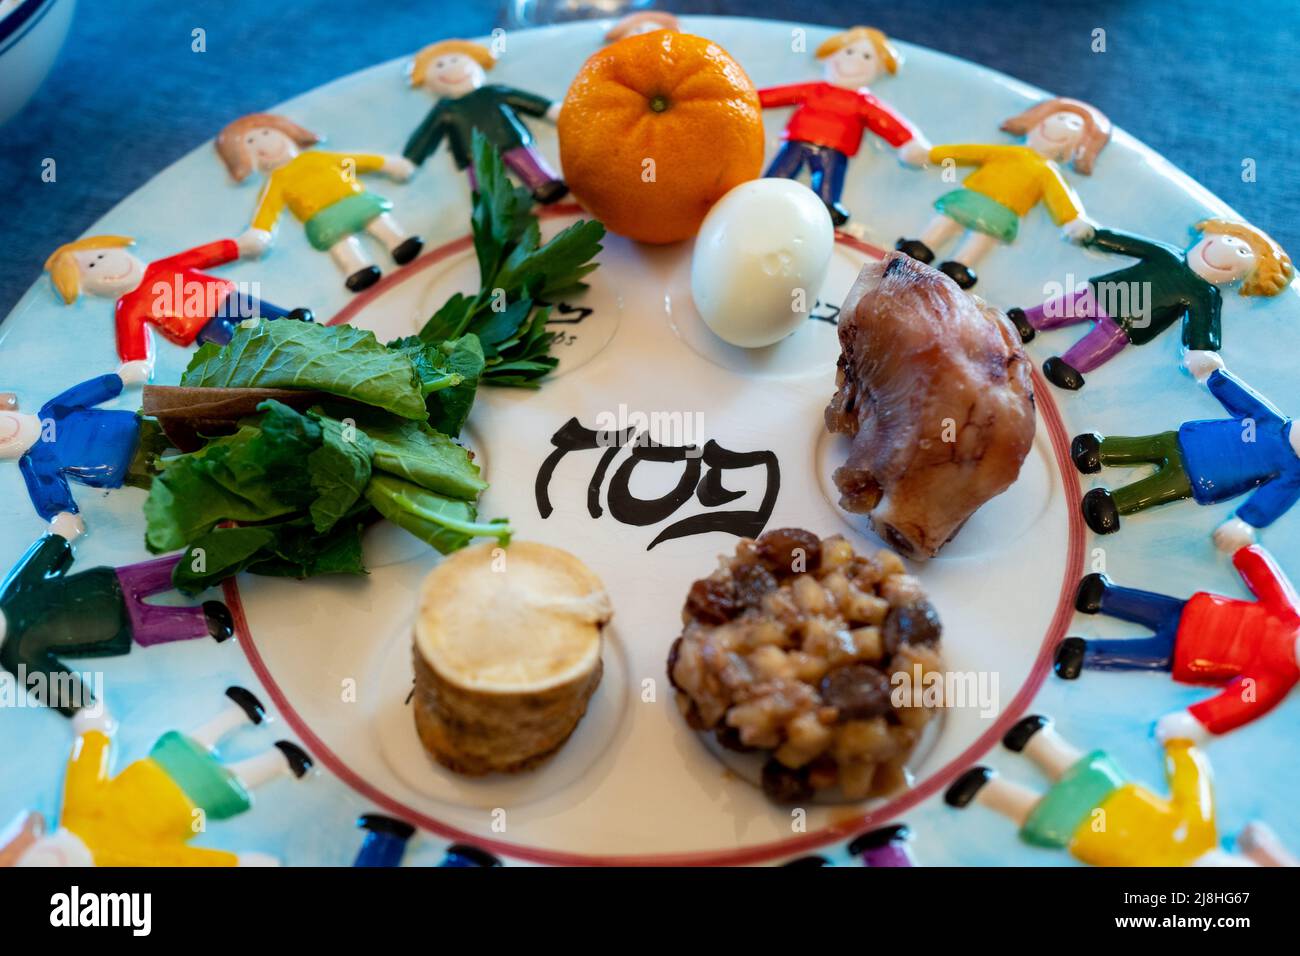 Close-up of ritual items on a Passover Seder plate during the Jewish holiday of Passover, Lafayette, California, April 16, 2022. Photo courtesy Sftm. Stock Photo